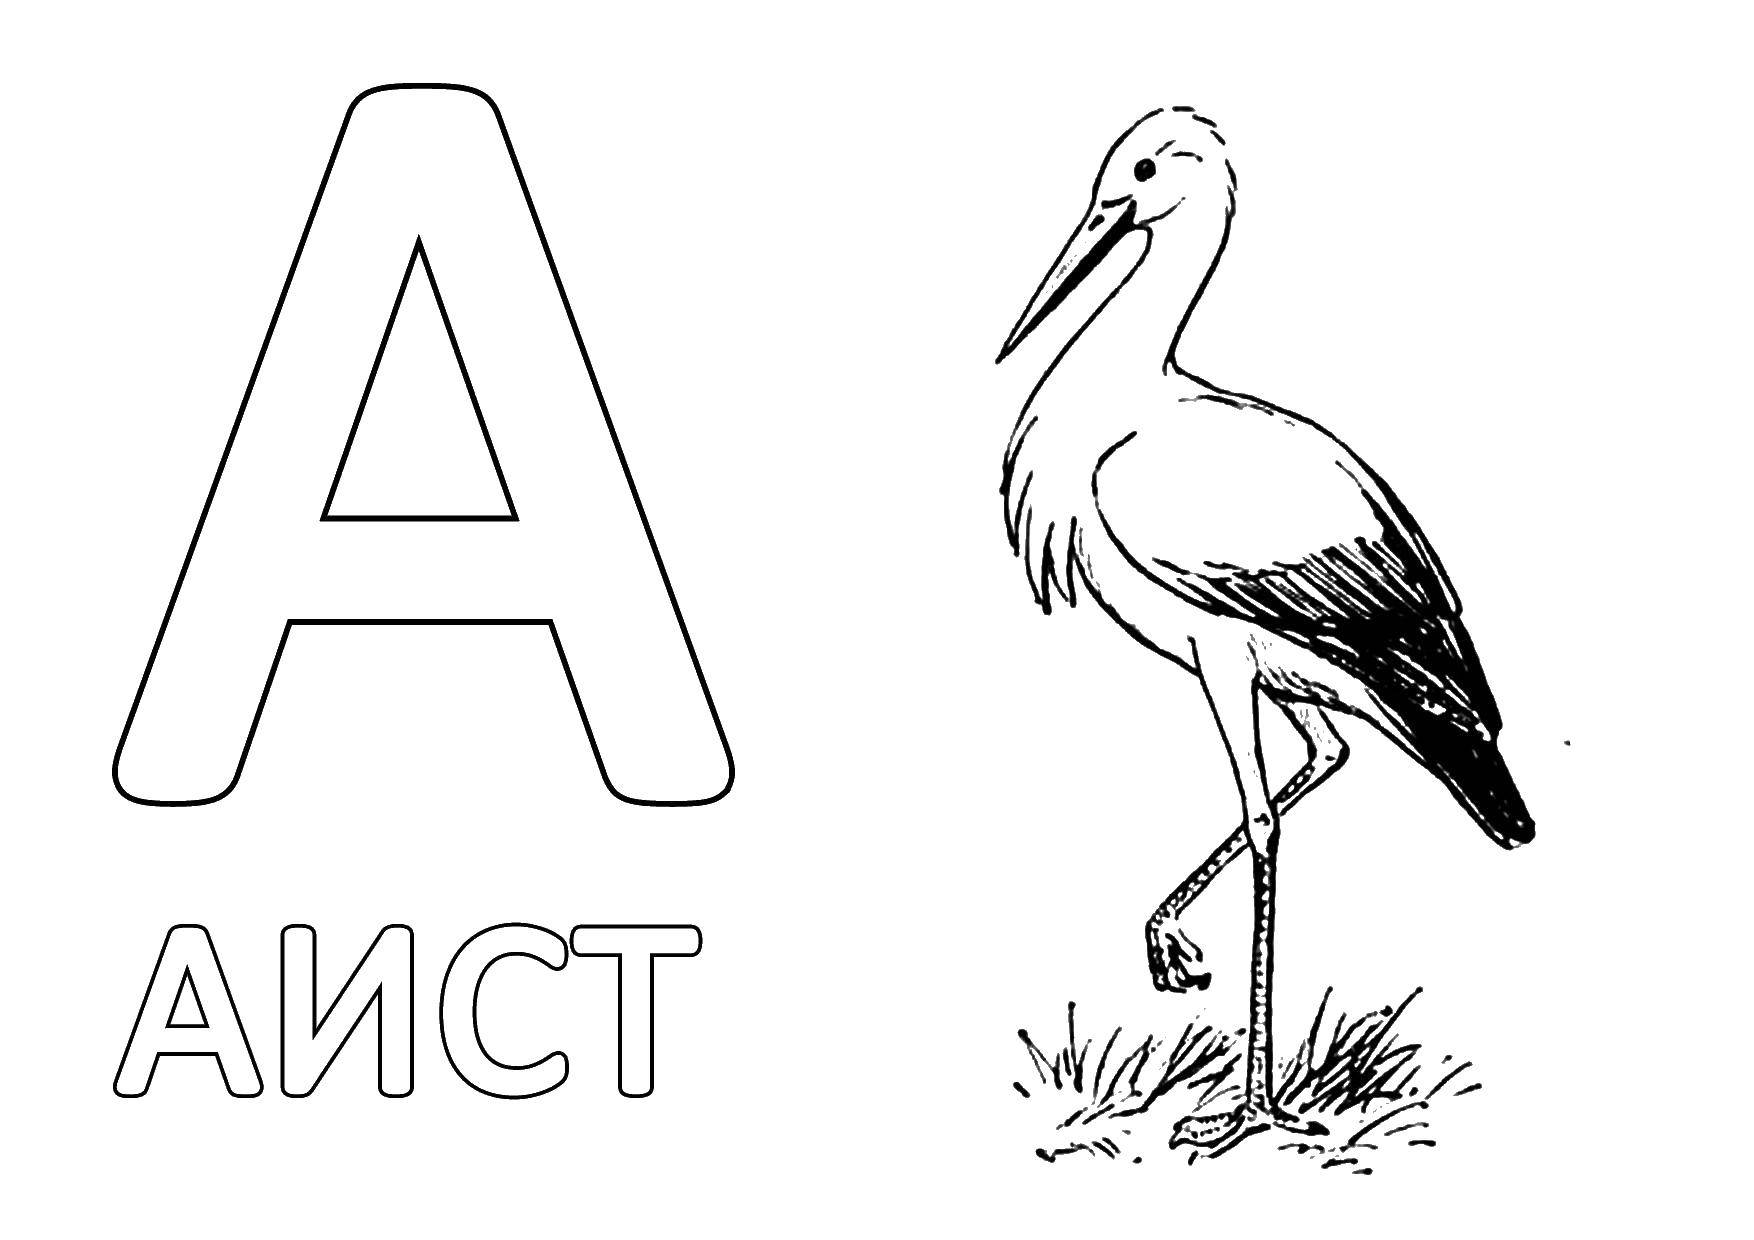 Coloring Stork. Category letters. Tags:  stork, letters.